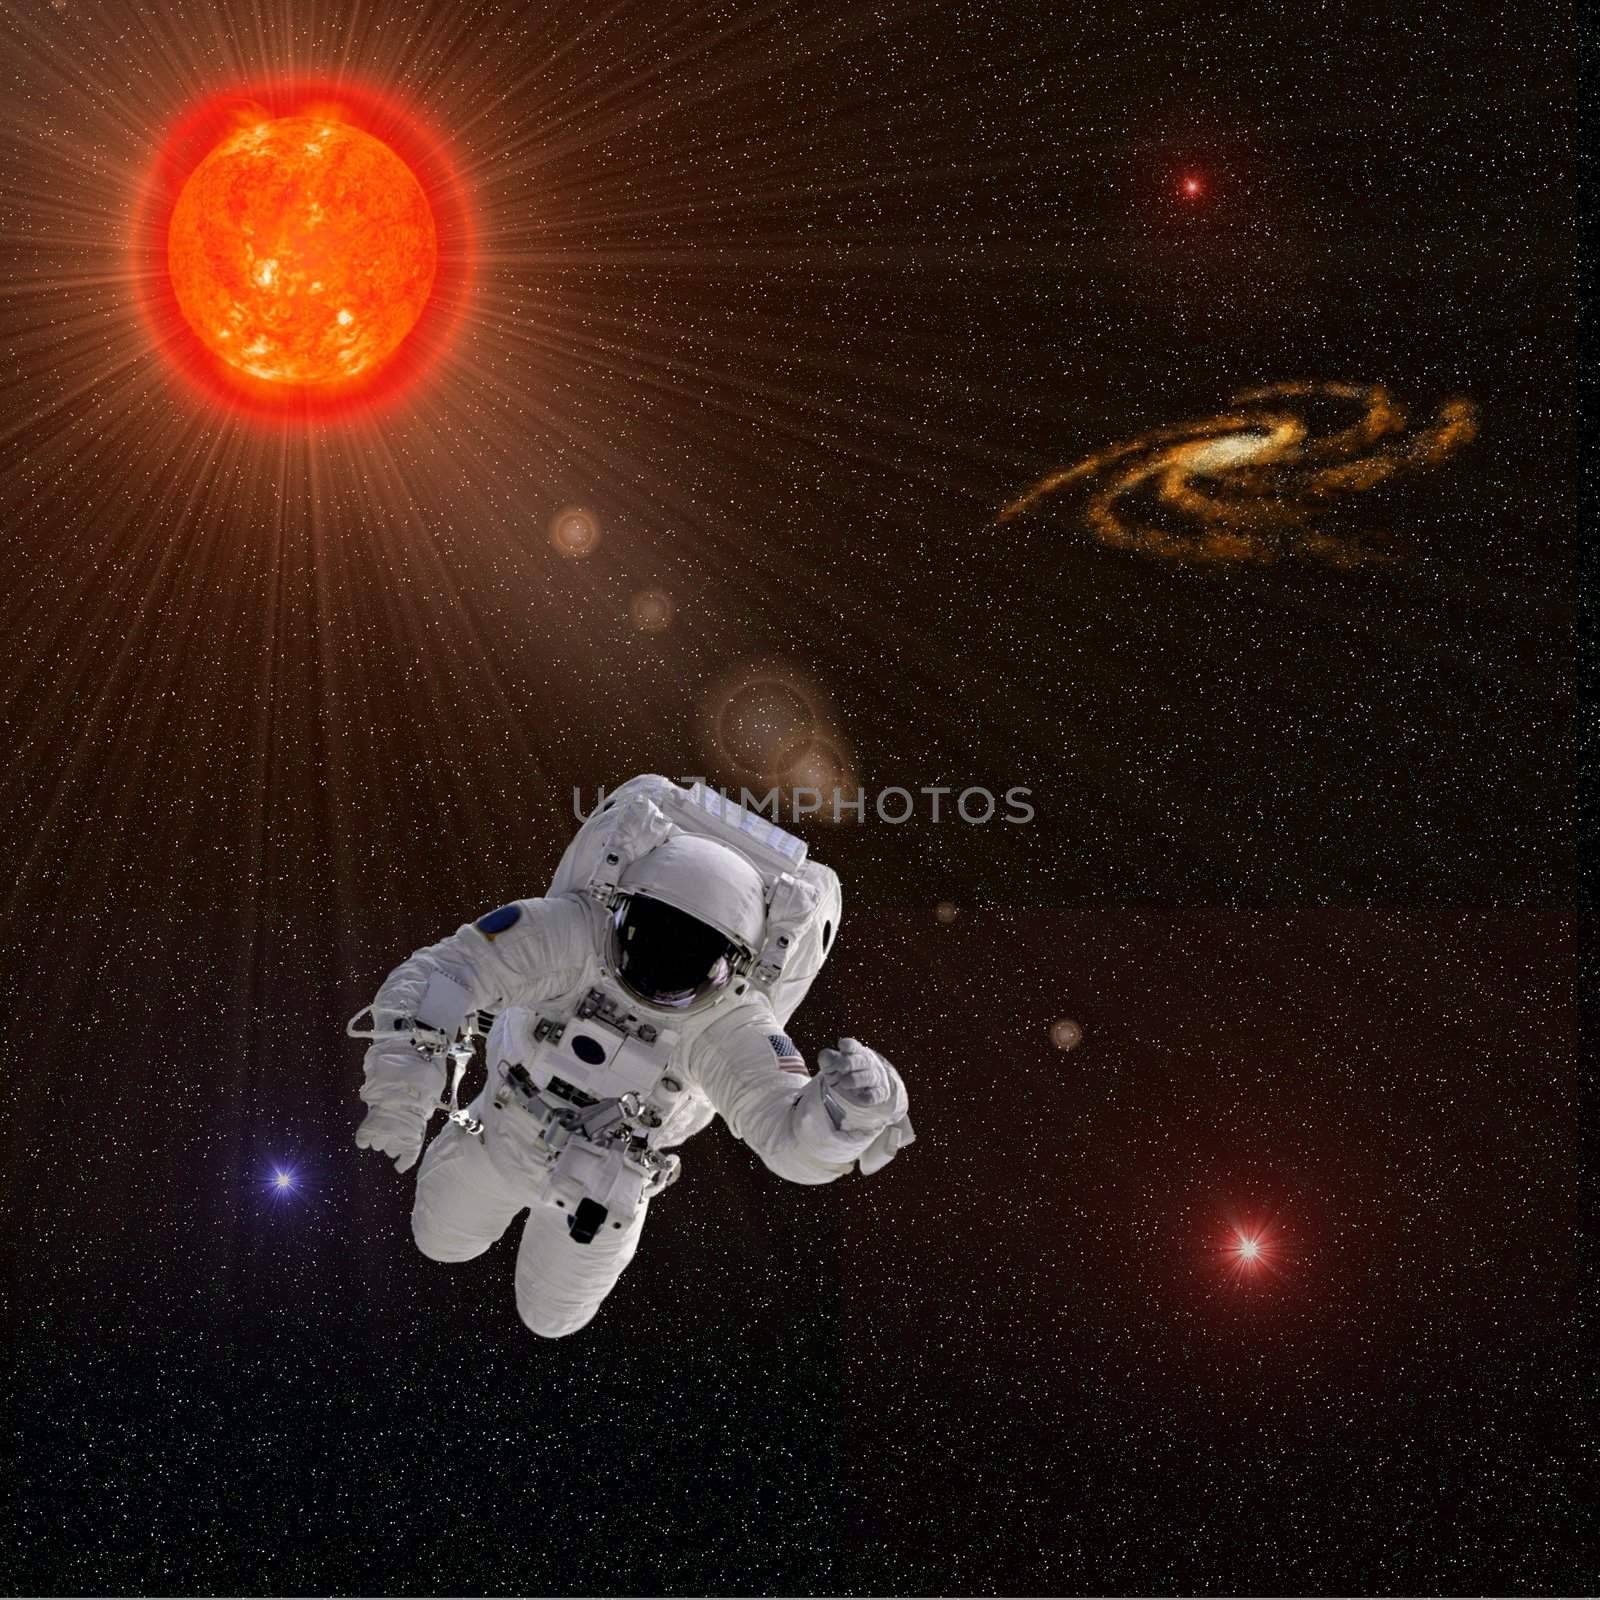 Flying astronaut on a background with Sun Stars Some components of this image are provided courtesy of NASA, and have been found at nasaimages.org